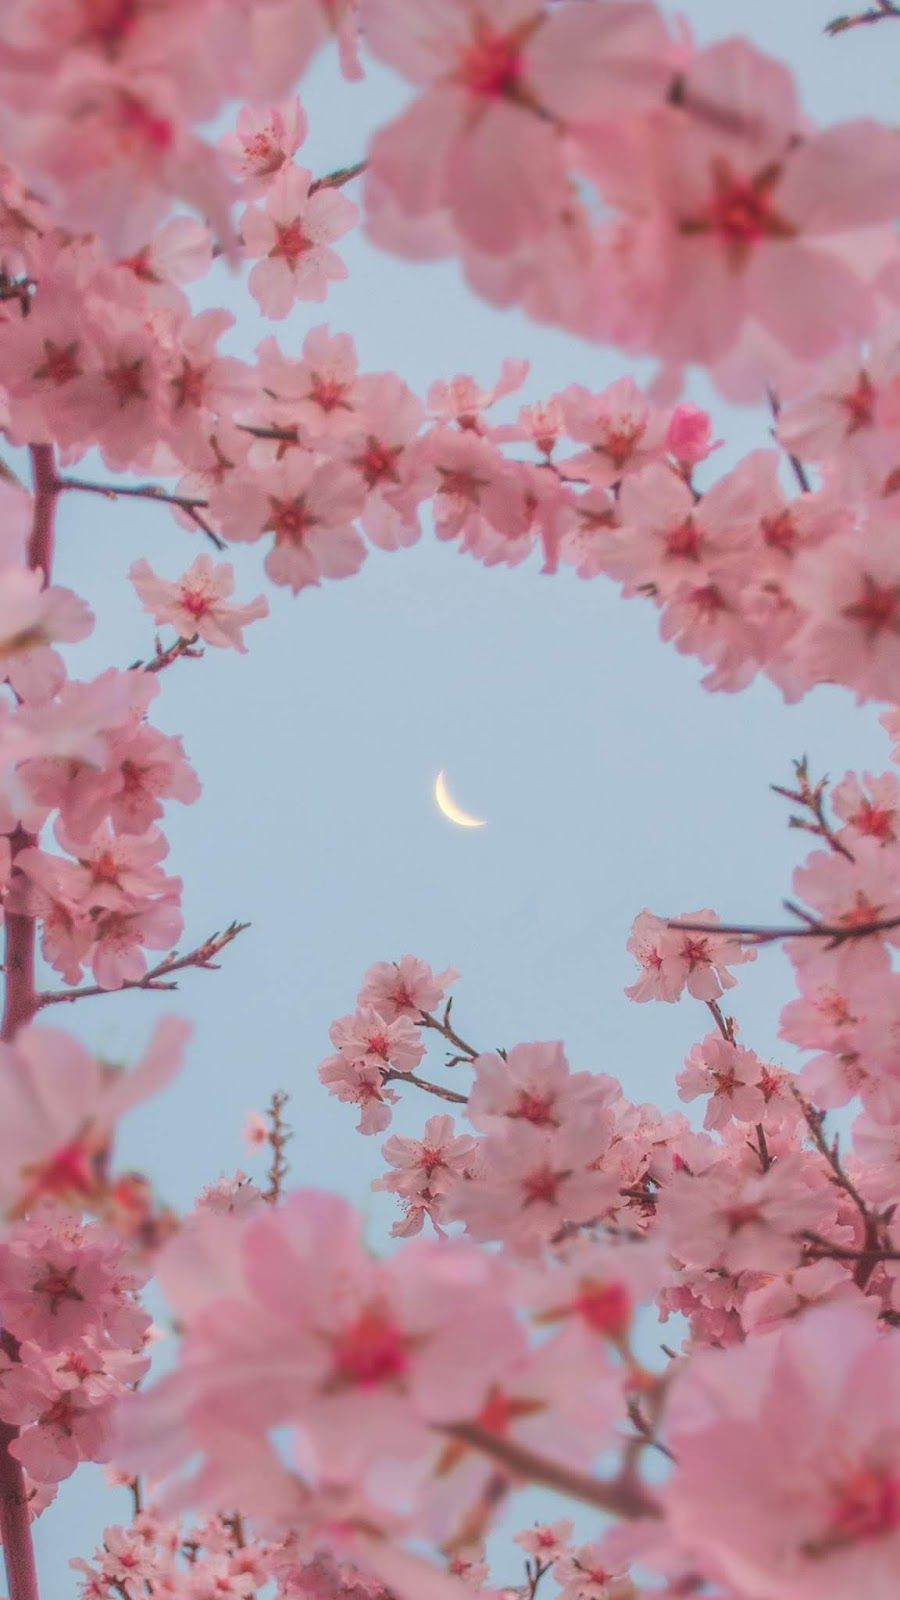 A branch of cherry blossoms in bloom with a crescent moon in the background - Cherry blossom, cherry